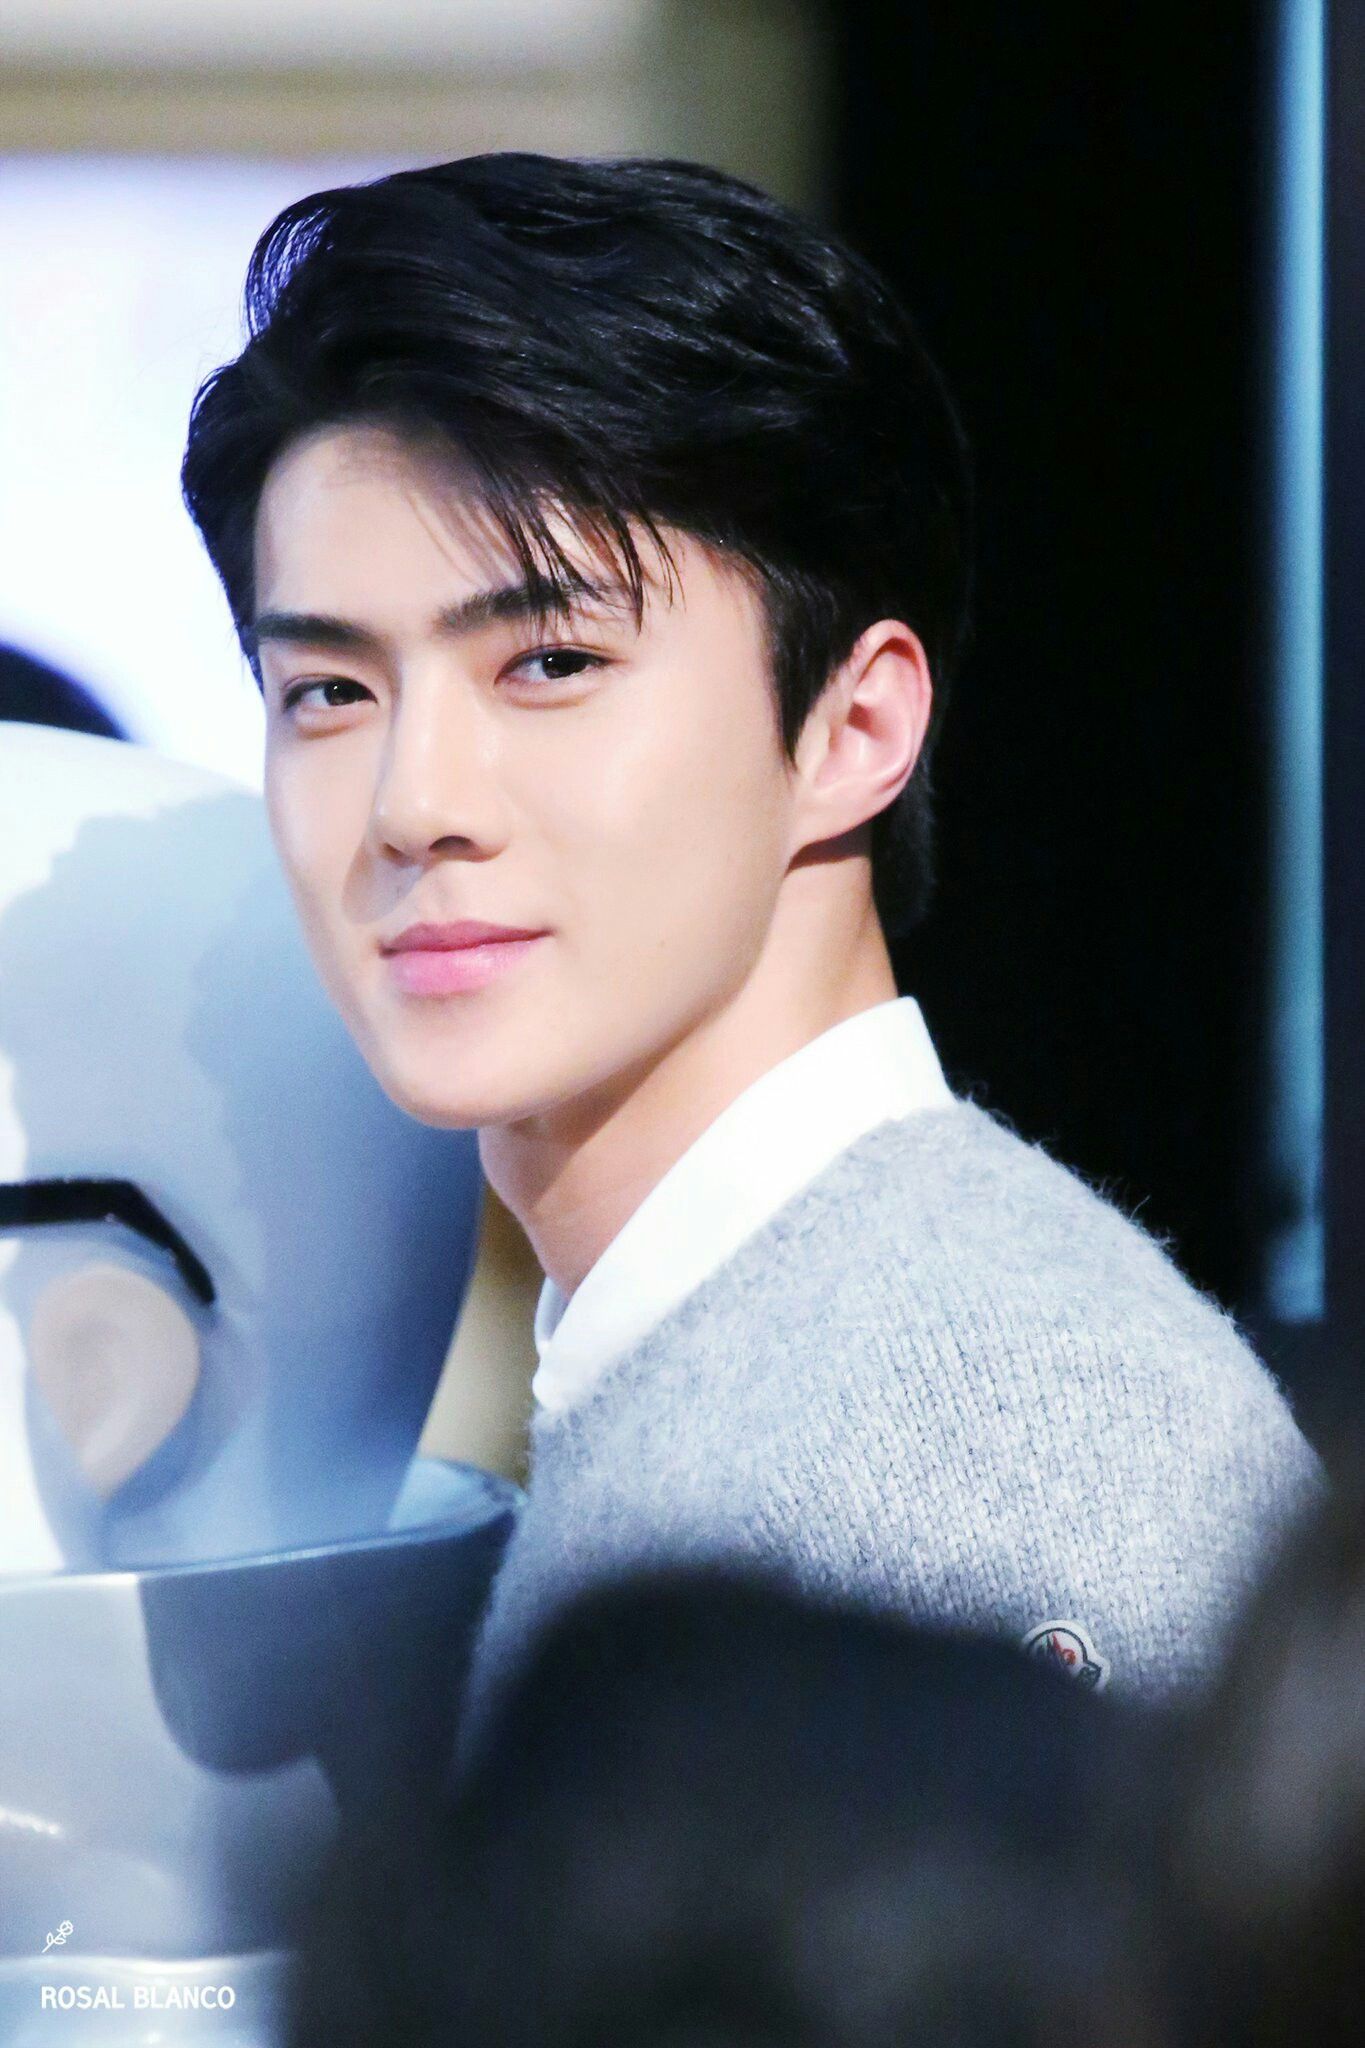 Exo Member Oh Sehun S Biography Age Height Profile 21 Kpop Wiki